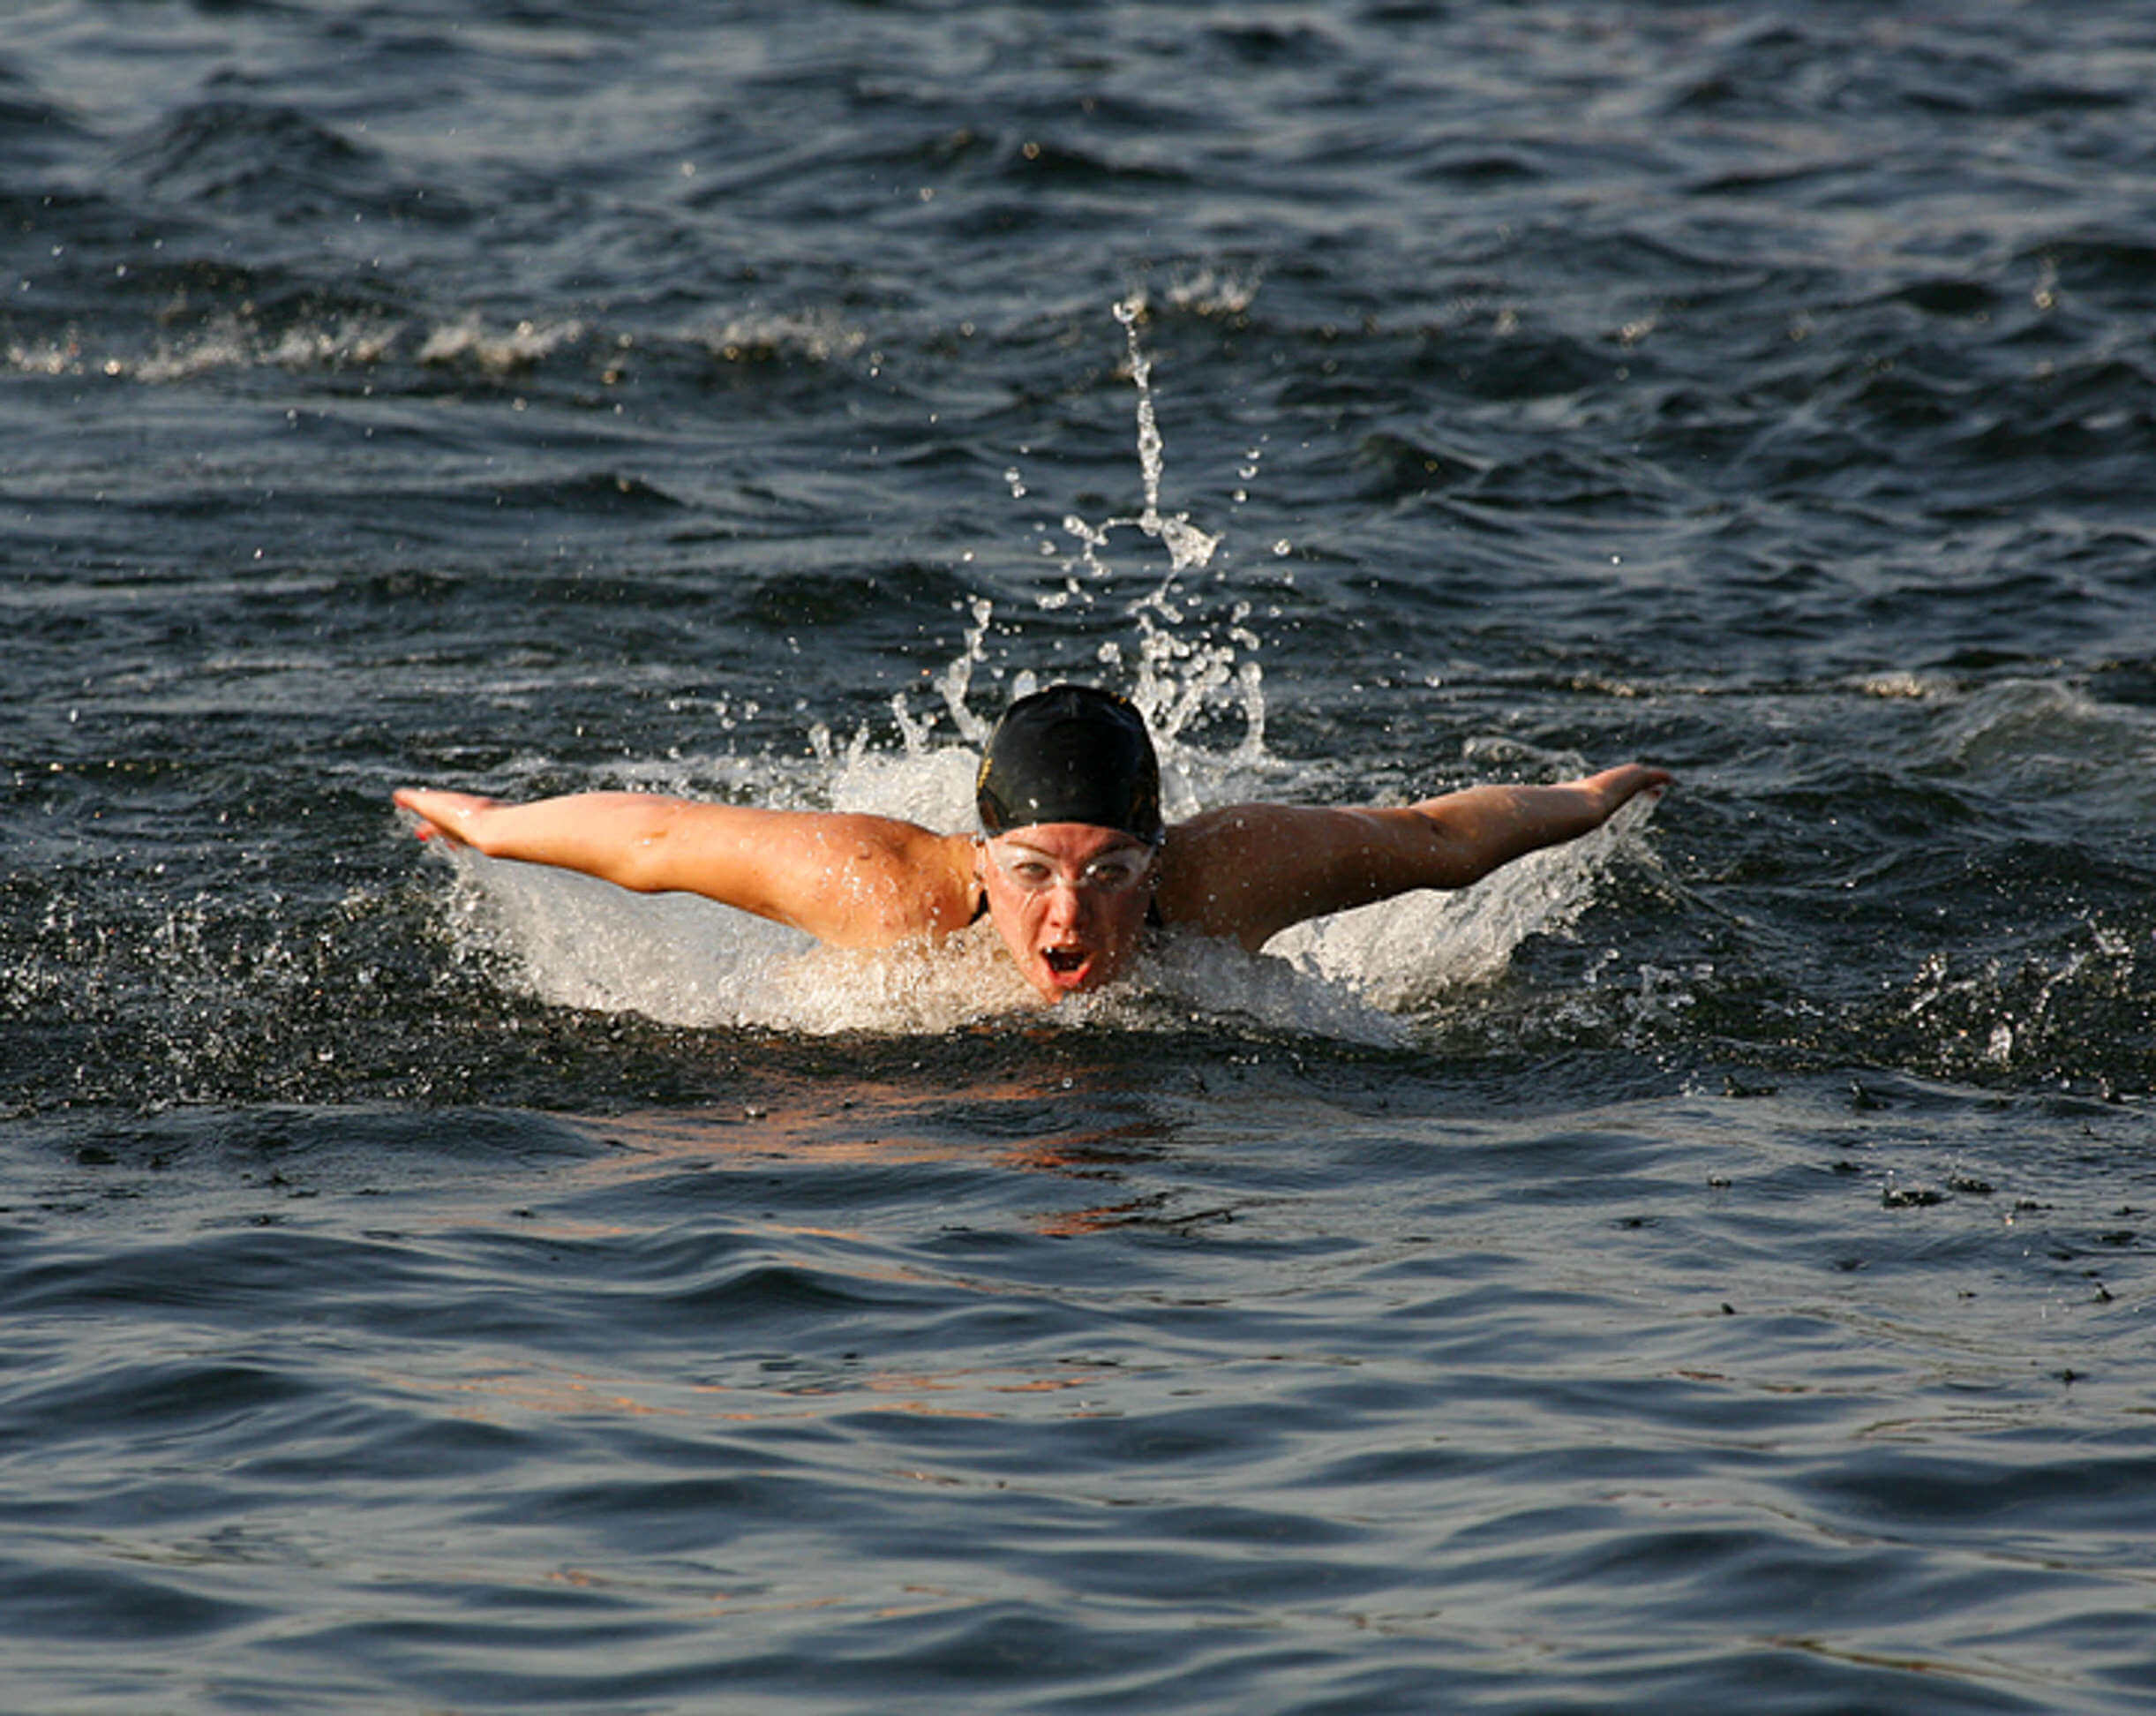 A swimmer competes in lifeguard races at Green Lake in Seattle Washington